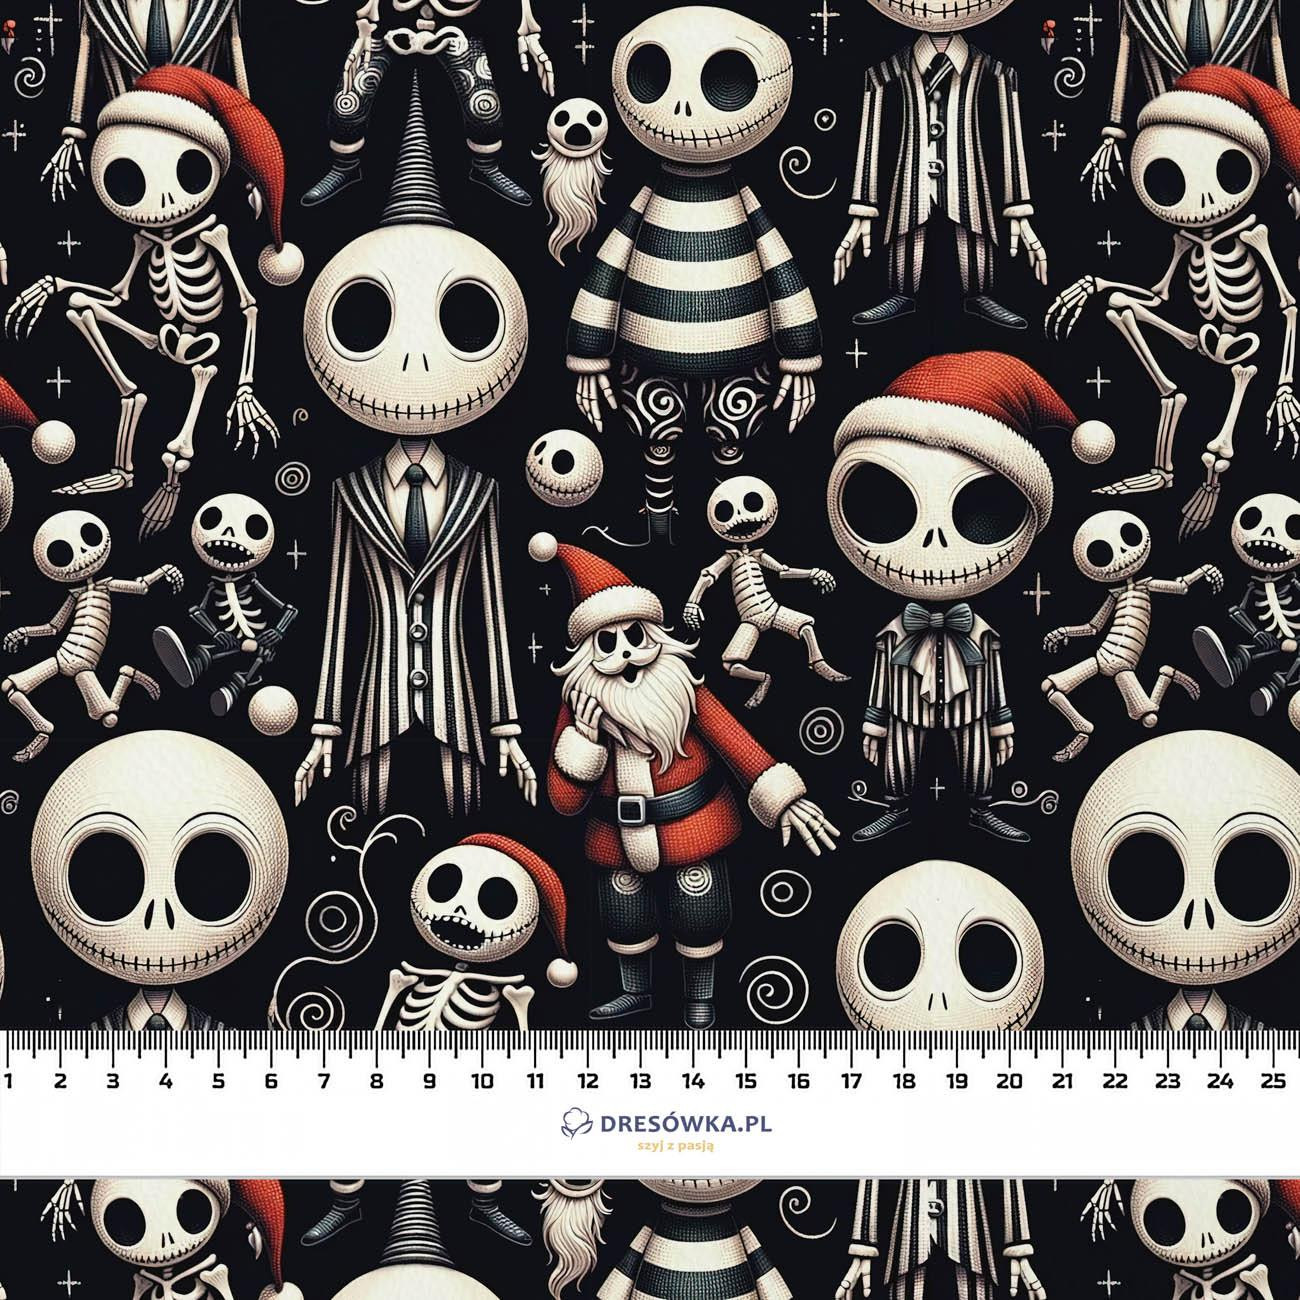 SKELETONS AND SANTAS - brushed knitwear with elastane ITY